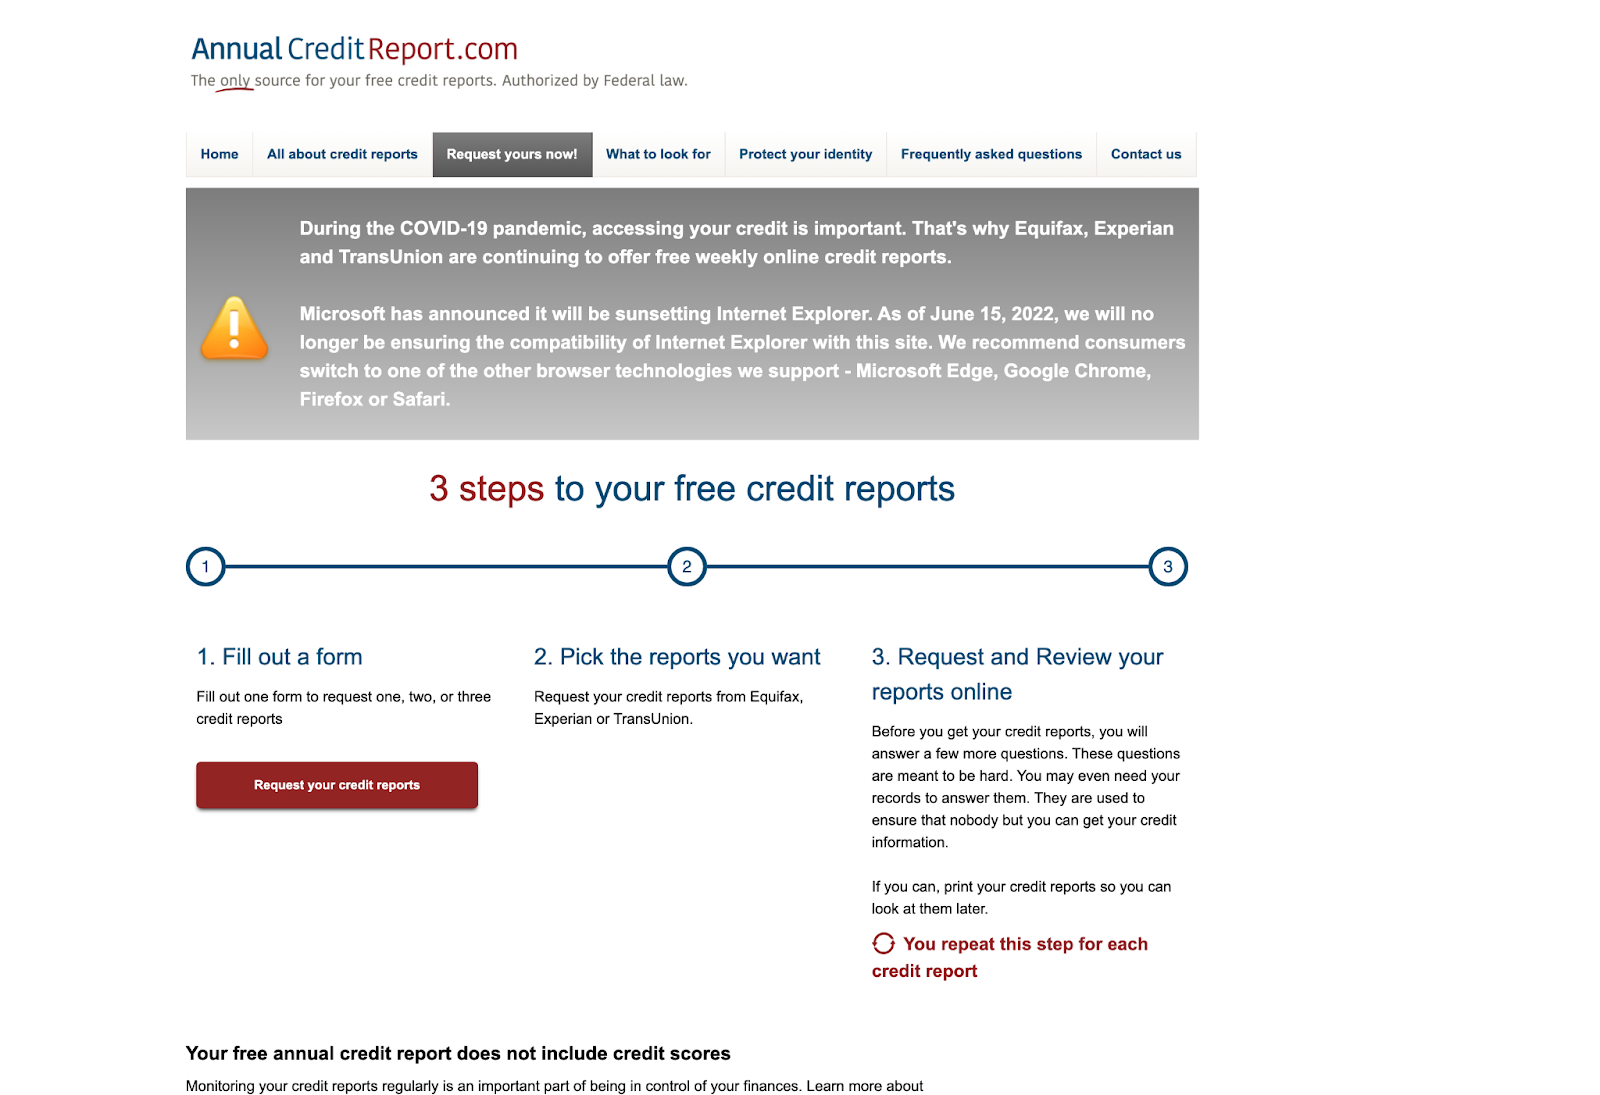 3 steps to get your free credit report on AnnualCreditReport.com